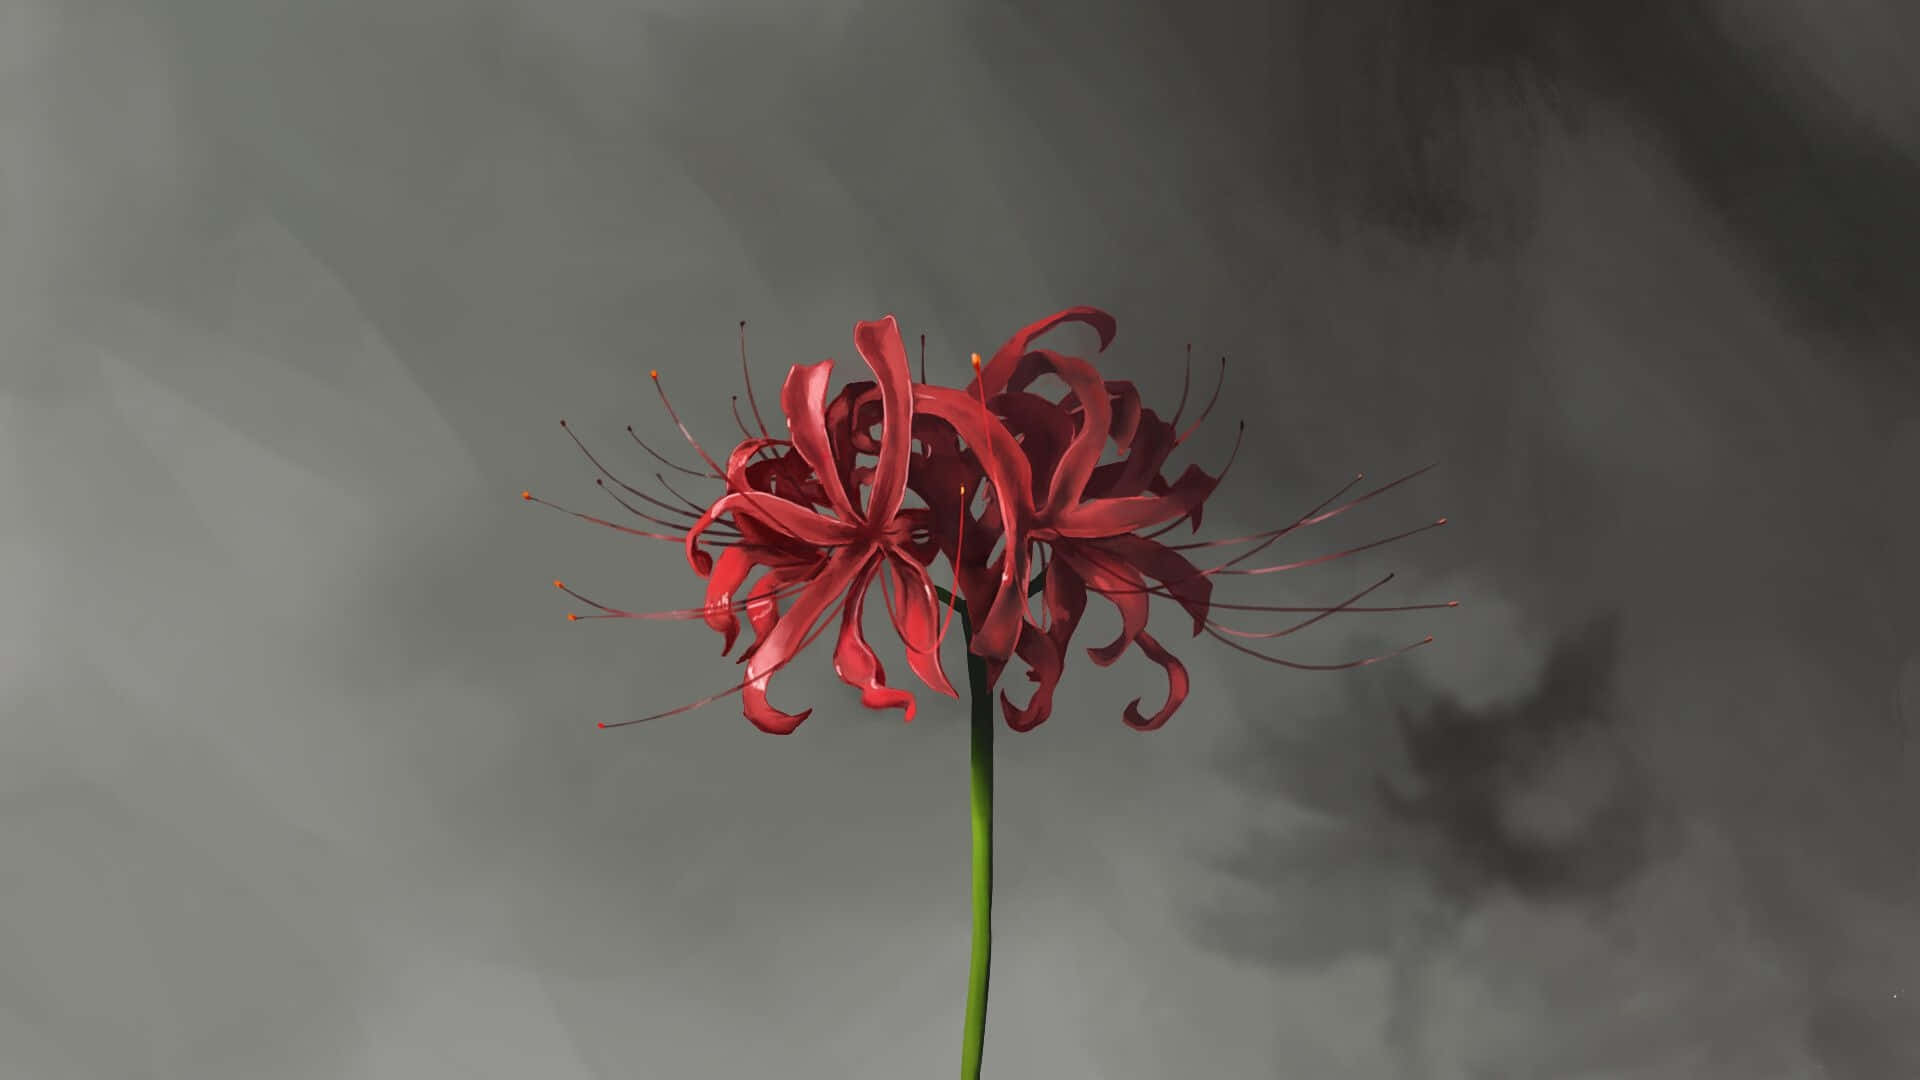 Tokyo Ghoul Flower With Shadow Wallpaper